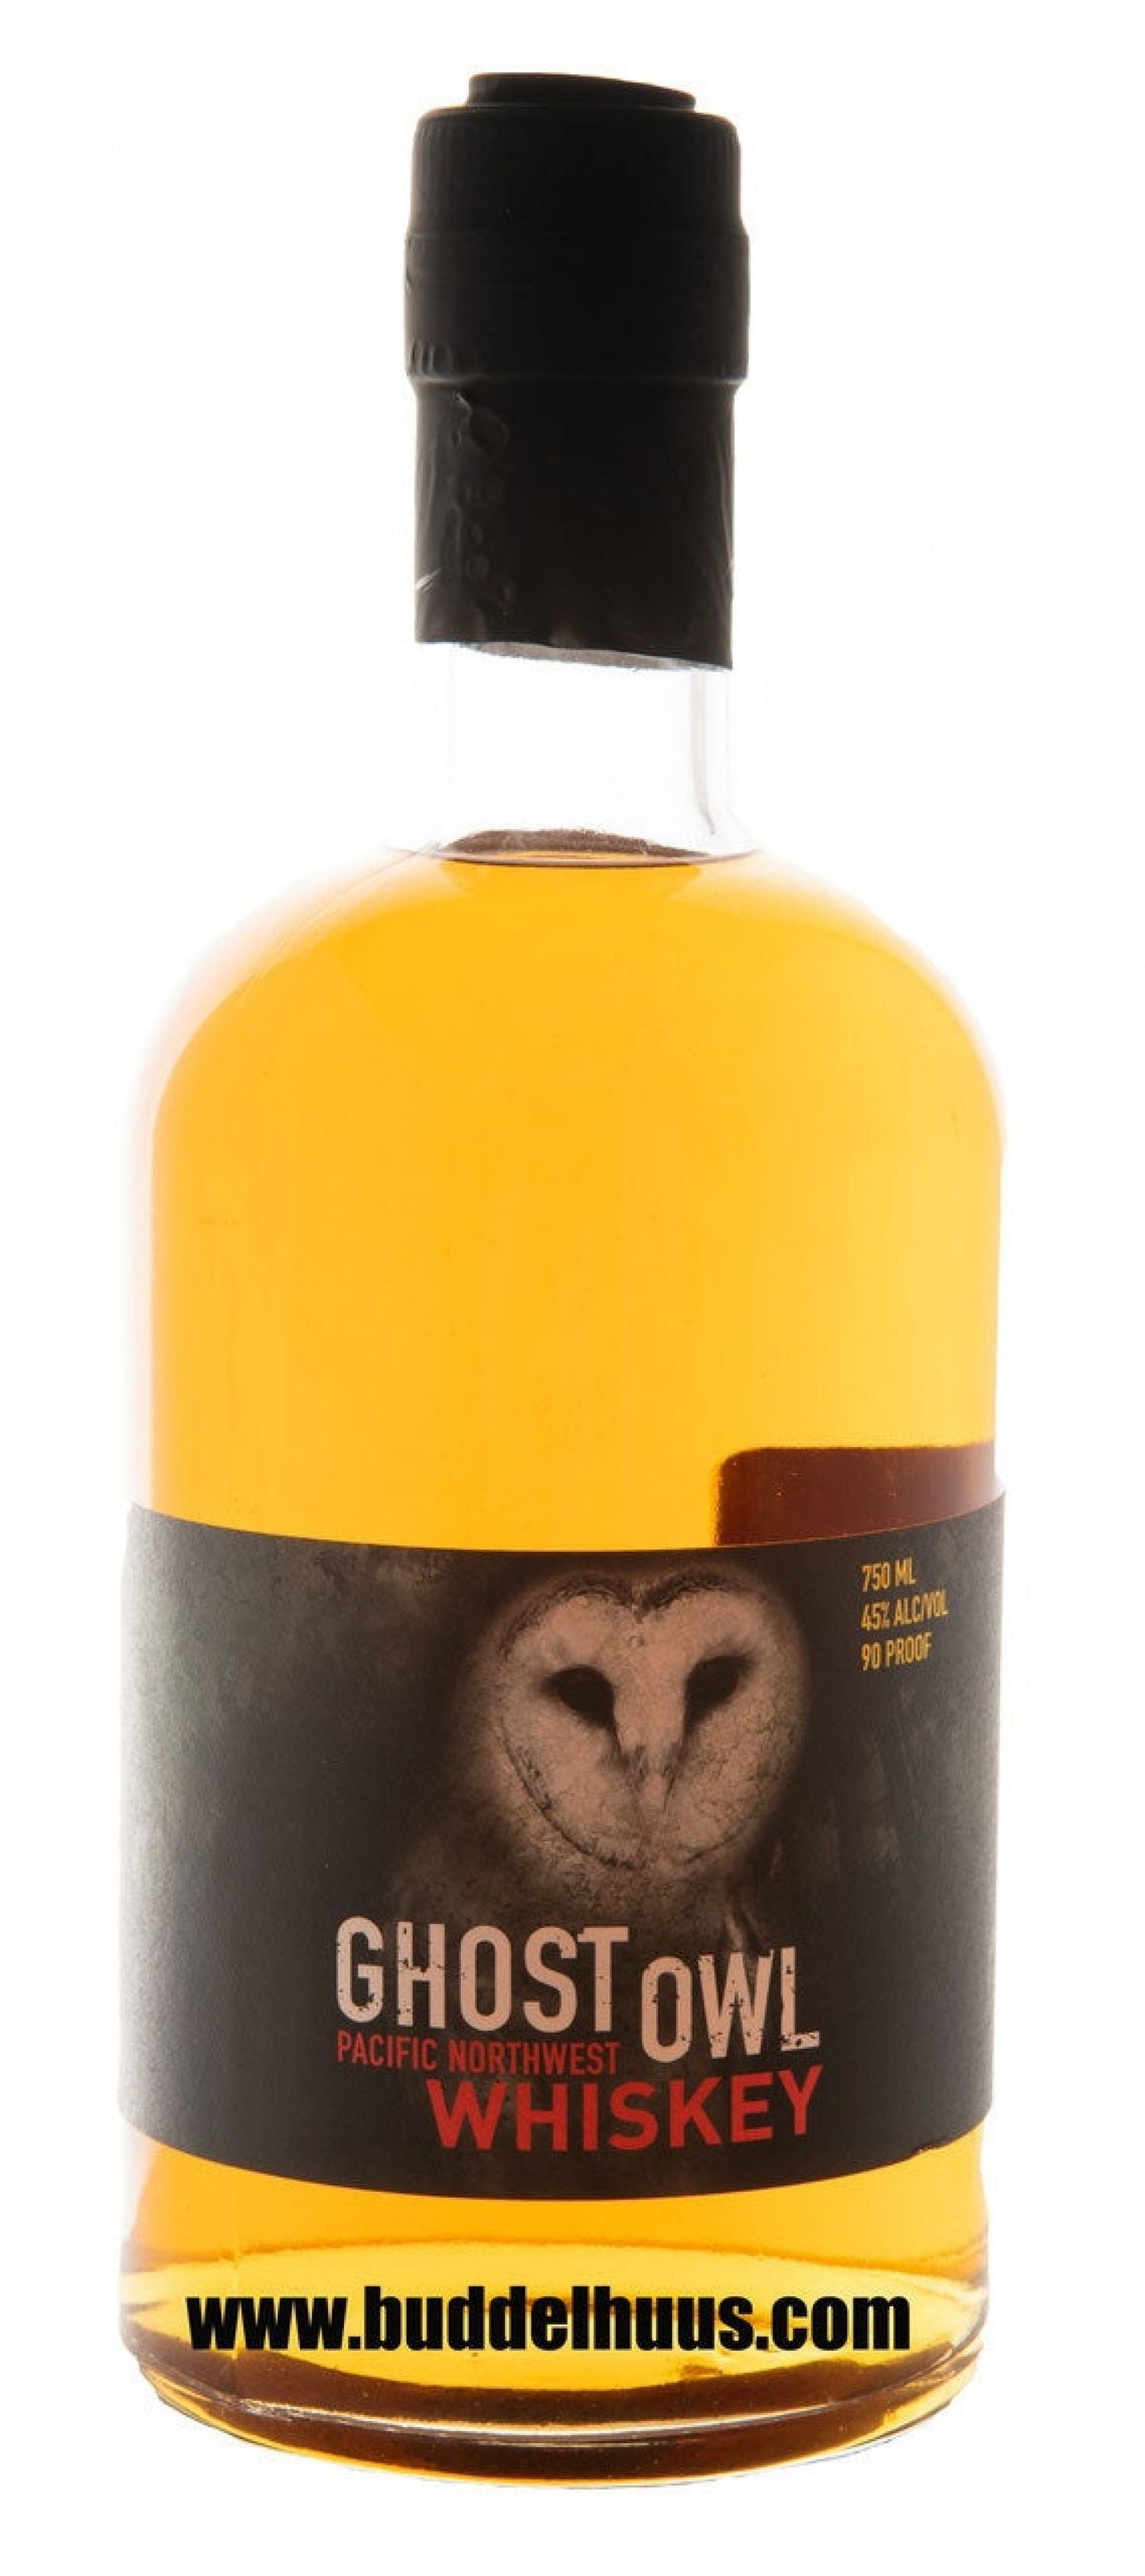 Ghost Owl Pacific Northwest Whiskey